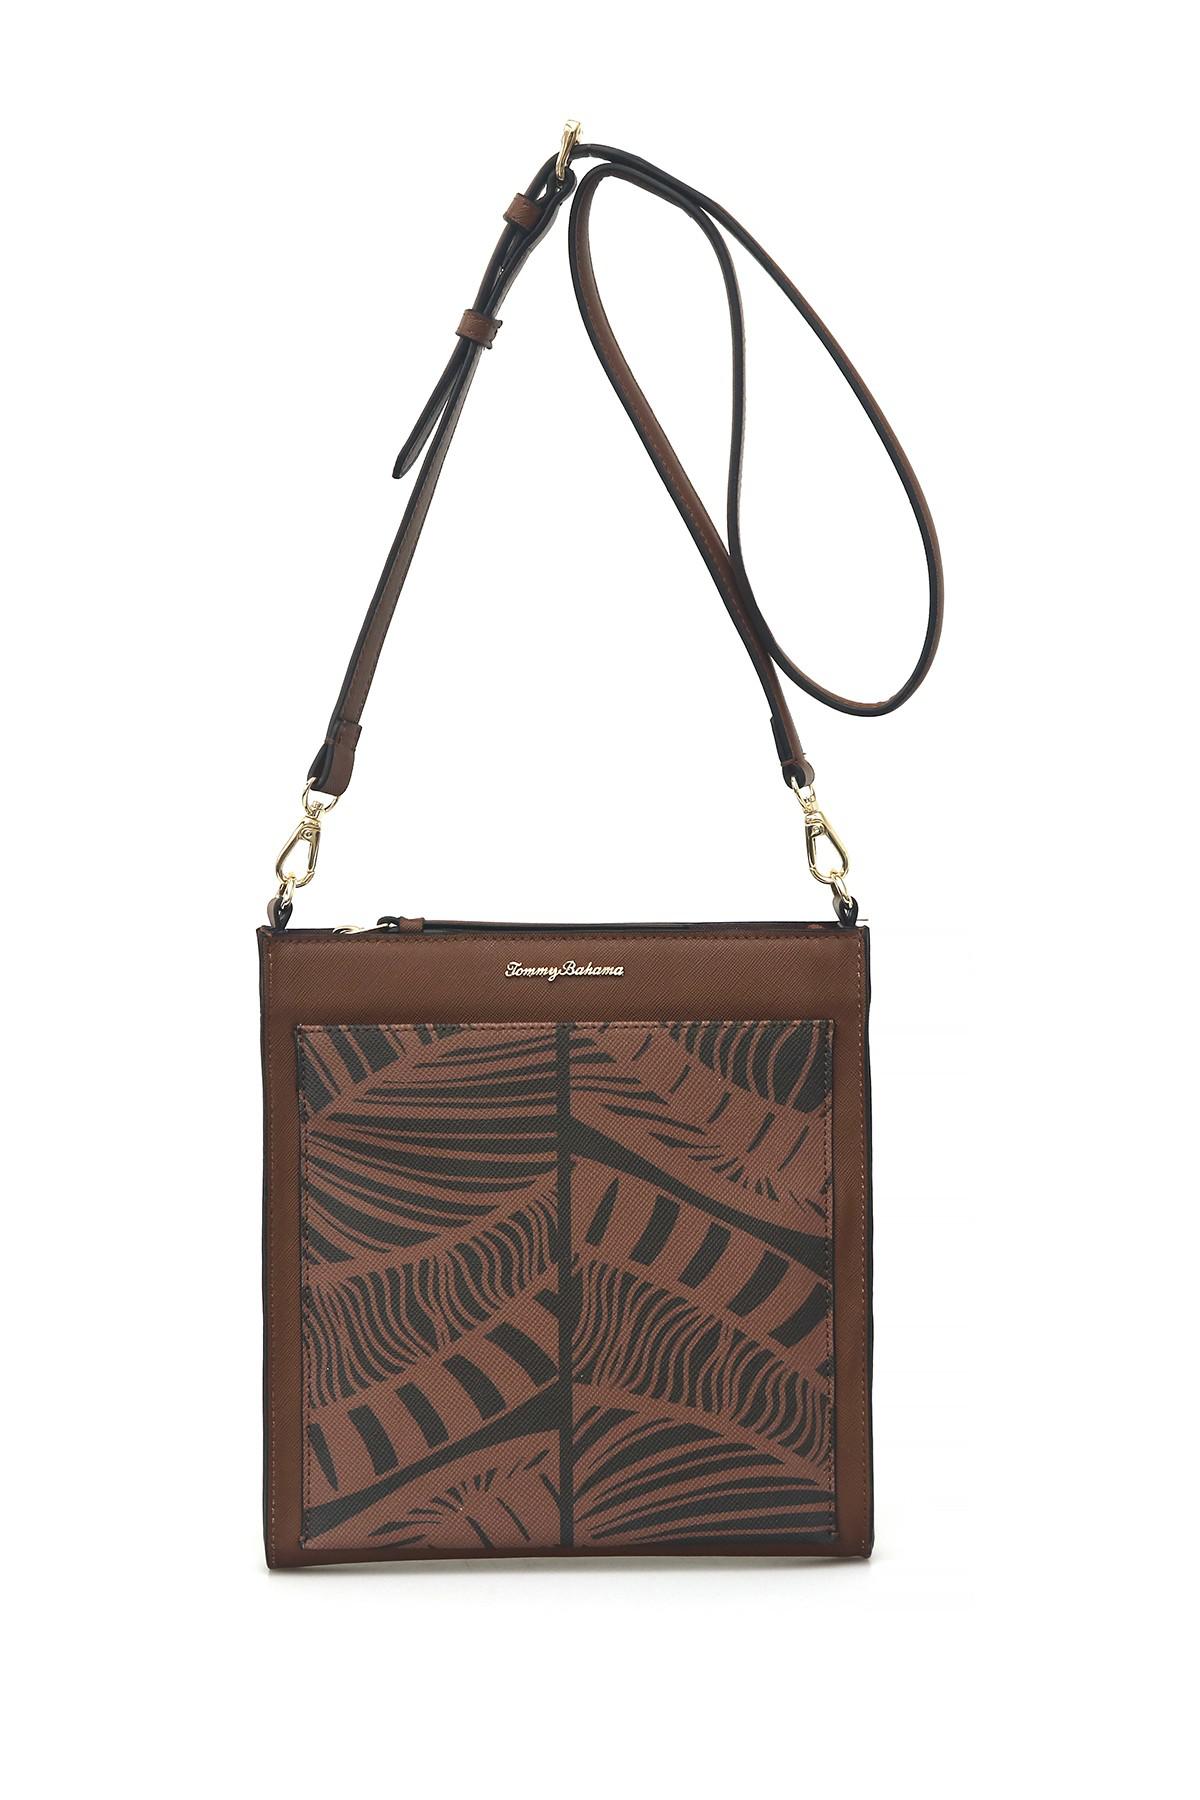 Tommy Bahama Drake Bay Leather Crossbody Bag in Brown - Lyst